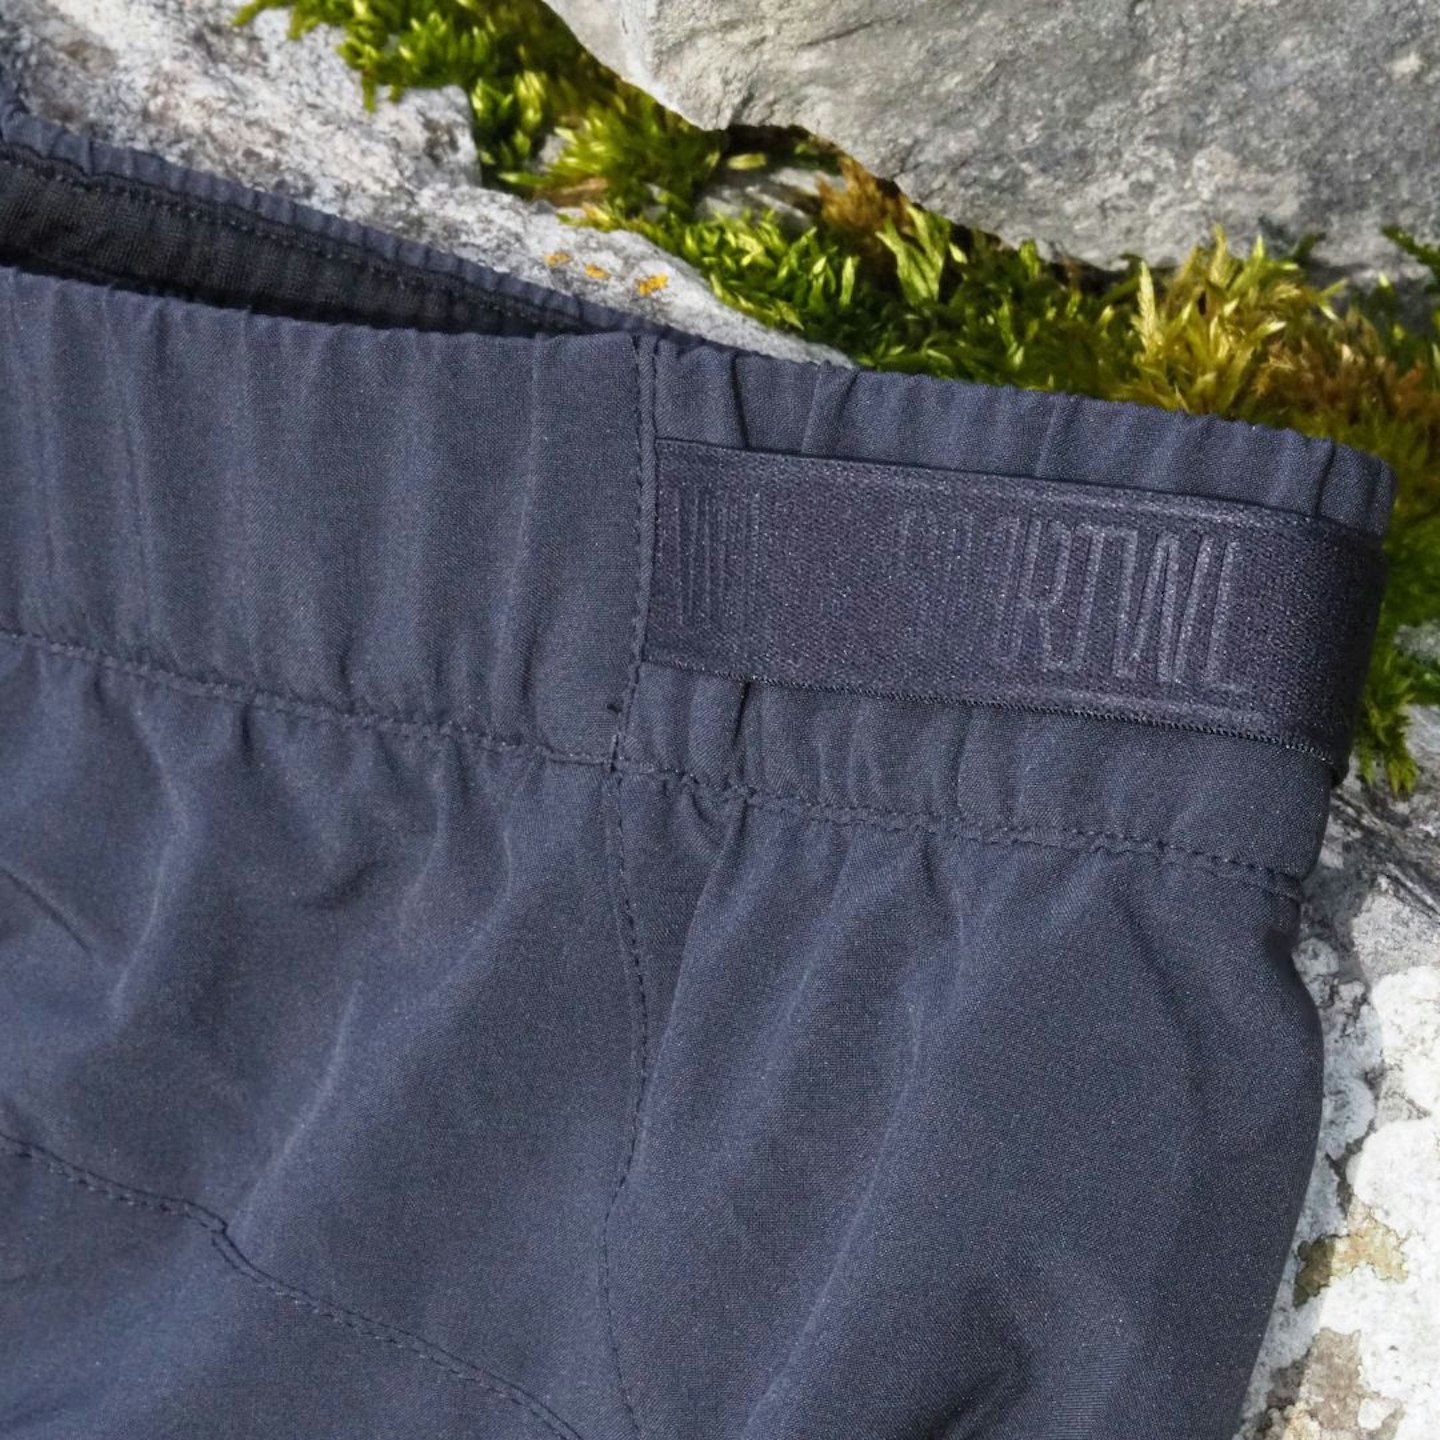 Smartwool Active Lined Short waistband